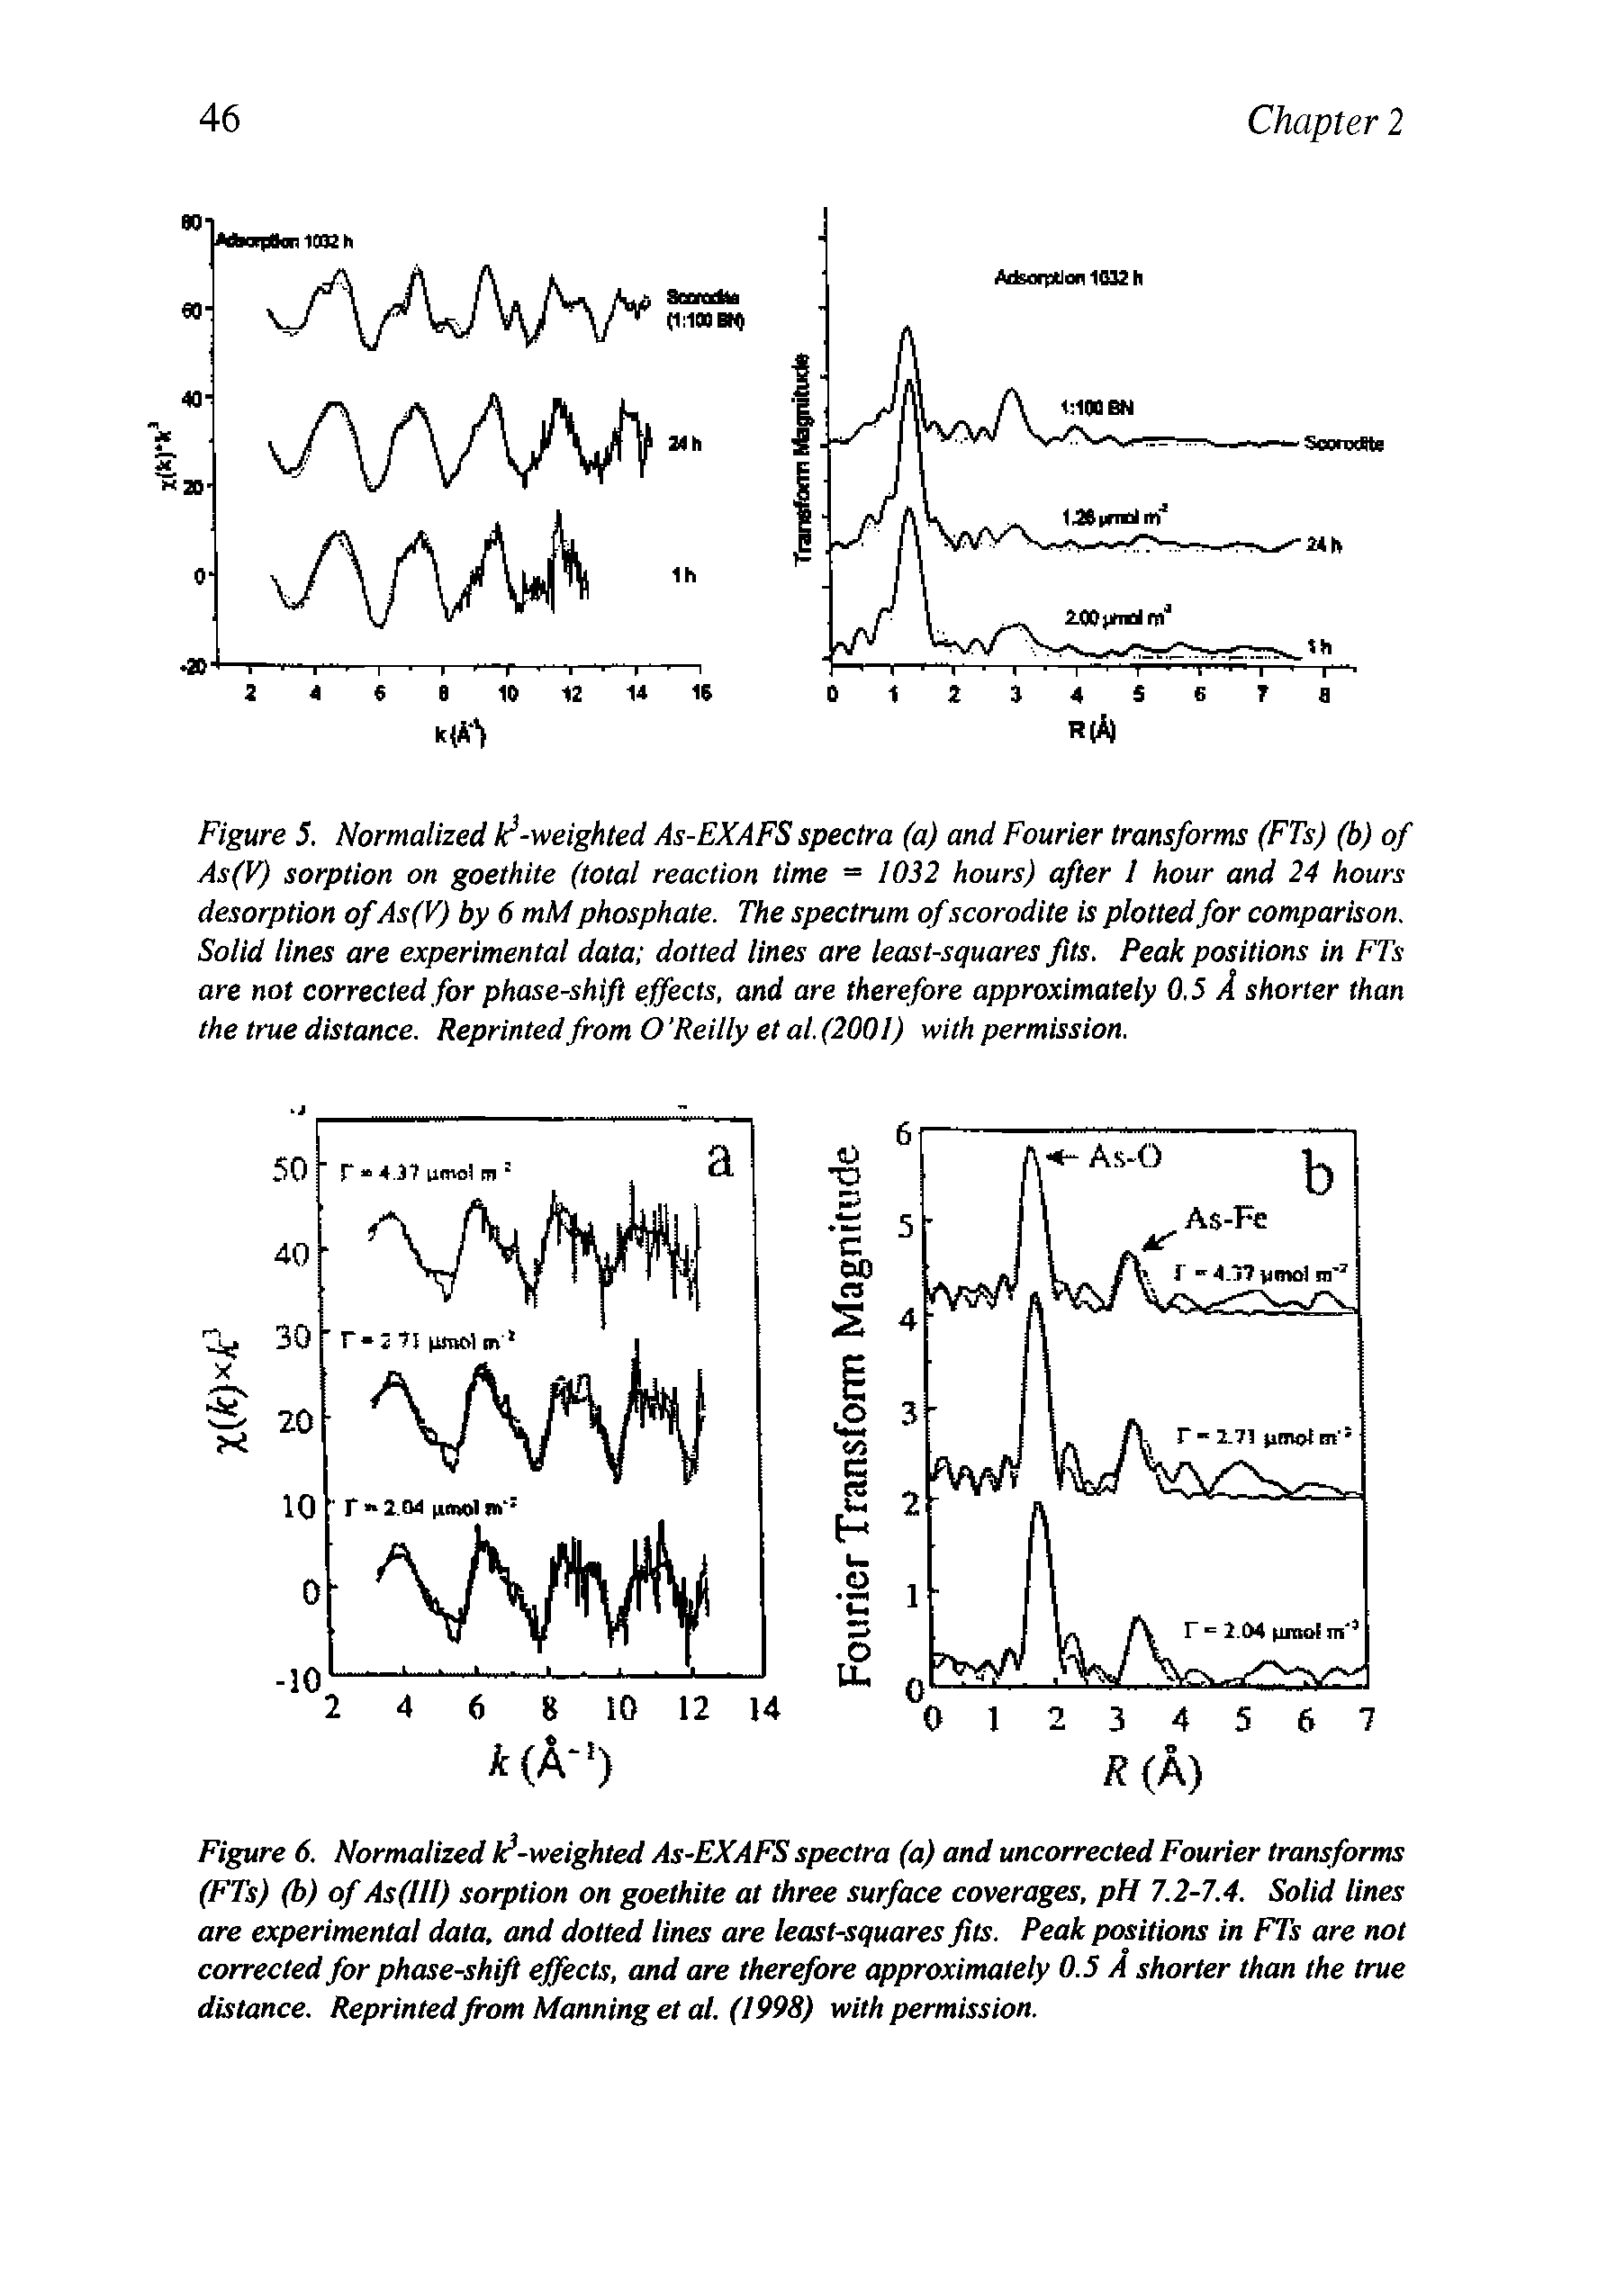 Figure 5. Normalized -weighted As-EXAFS spectra (a) and Fourier transforms (FTs) (b) of As(V) sorption on goethite (total reaction time = 1032 hours) after I hour and 24 hours desorption ofAs(V) by 6 mM phosphate. The spectrum ofscorodite is plotted for comparison. Solid lines are experimental data dotted lines are least-squares fits. Peak positions in FTs are not corrected for phase-shift effects, and are therefore approximately 0.5 A shorter than the true distance. Reprinted from O Reilly et al. (2001) with permission.